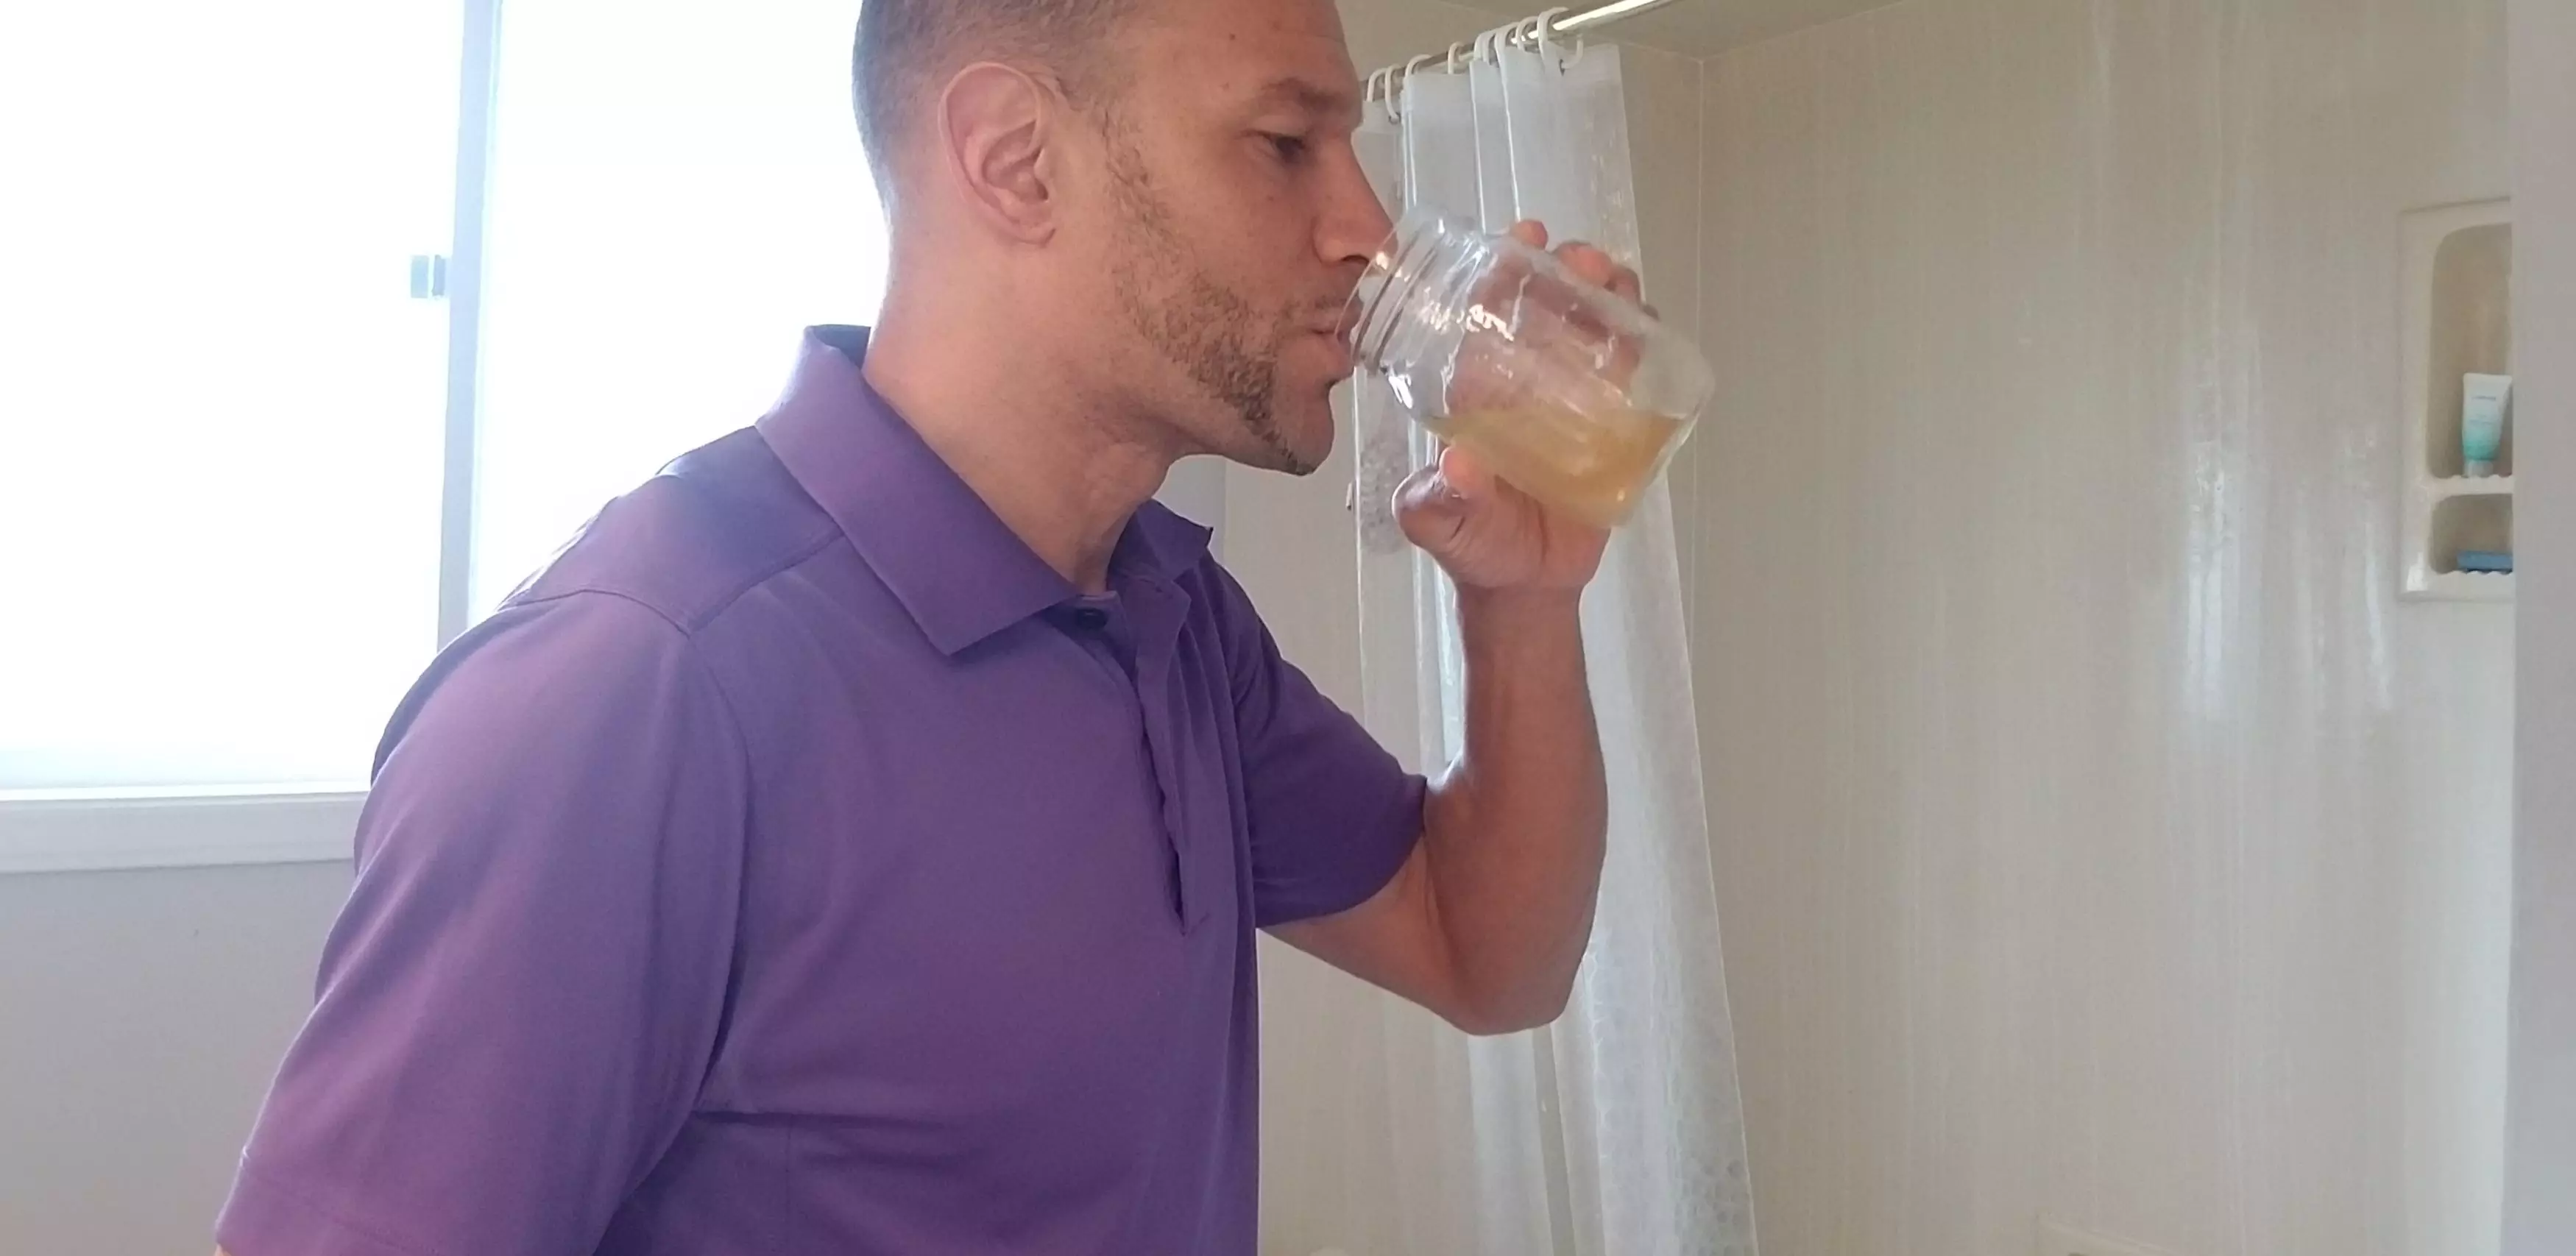 John DePass drinking his own urine as part of a strict diet.